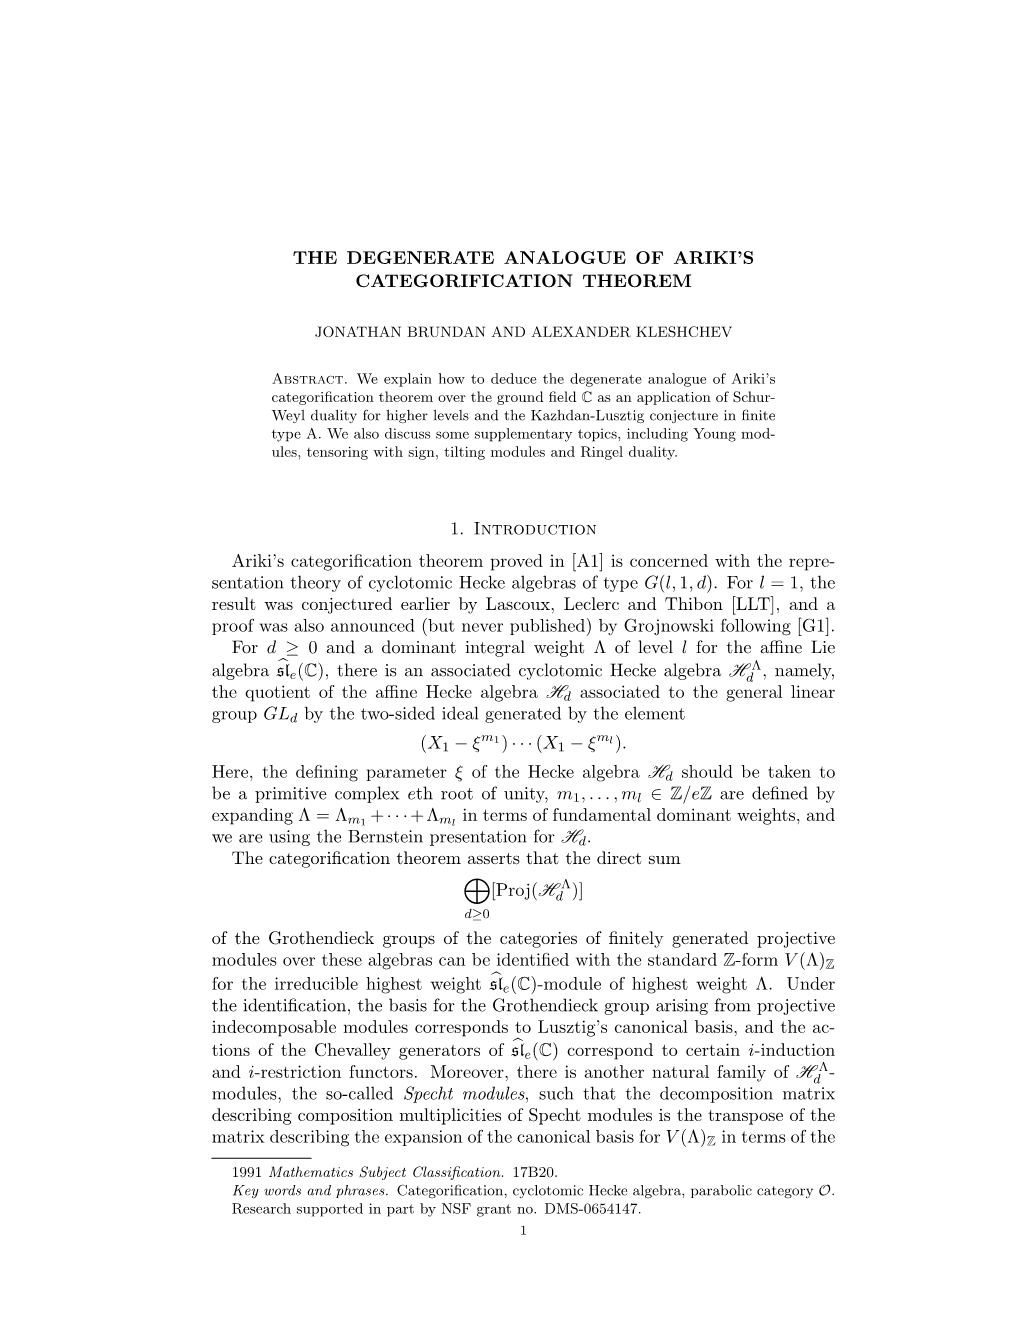 THE DEGENERATE ANALOGUE of ARIKI's CATEGORIFICATION THEOREM 1. Introduction Ariki's Categorification Theorem Proved in [A1]